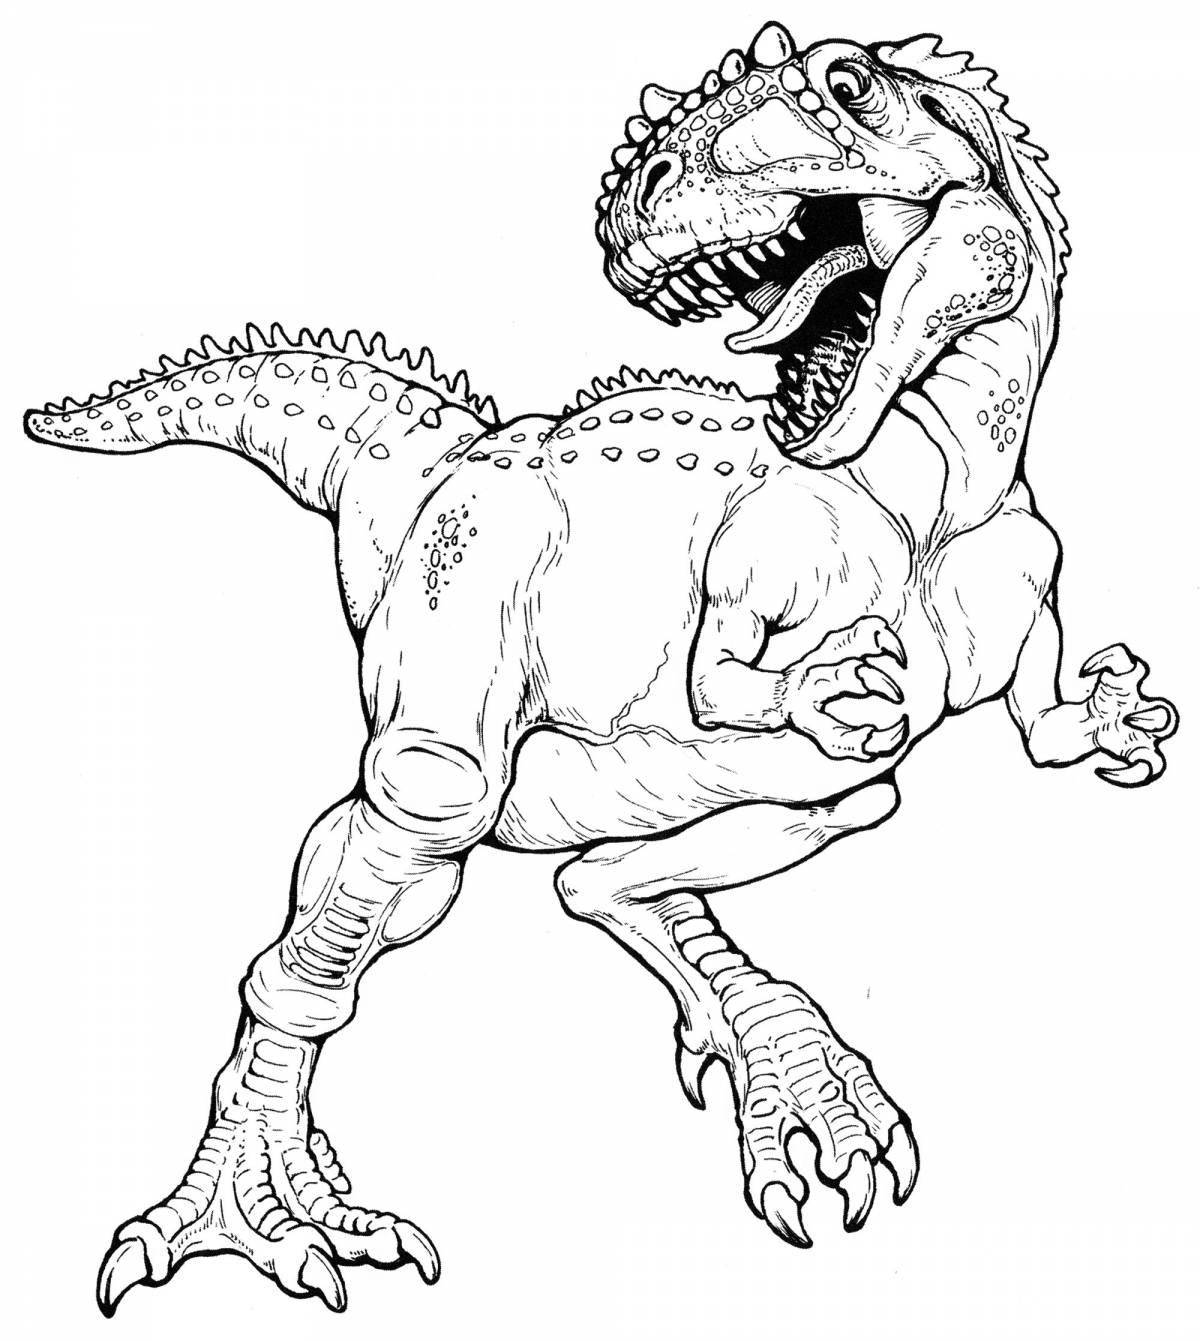 Fearless tarbosaurus coloring pages for kids